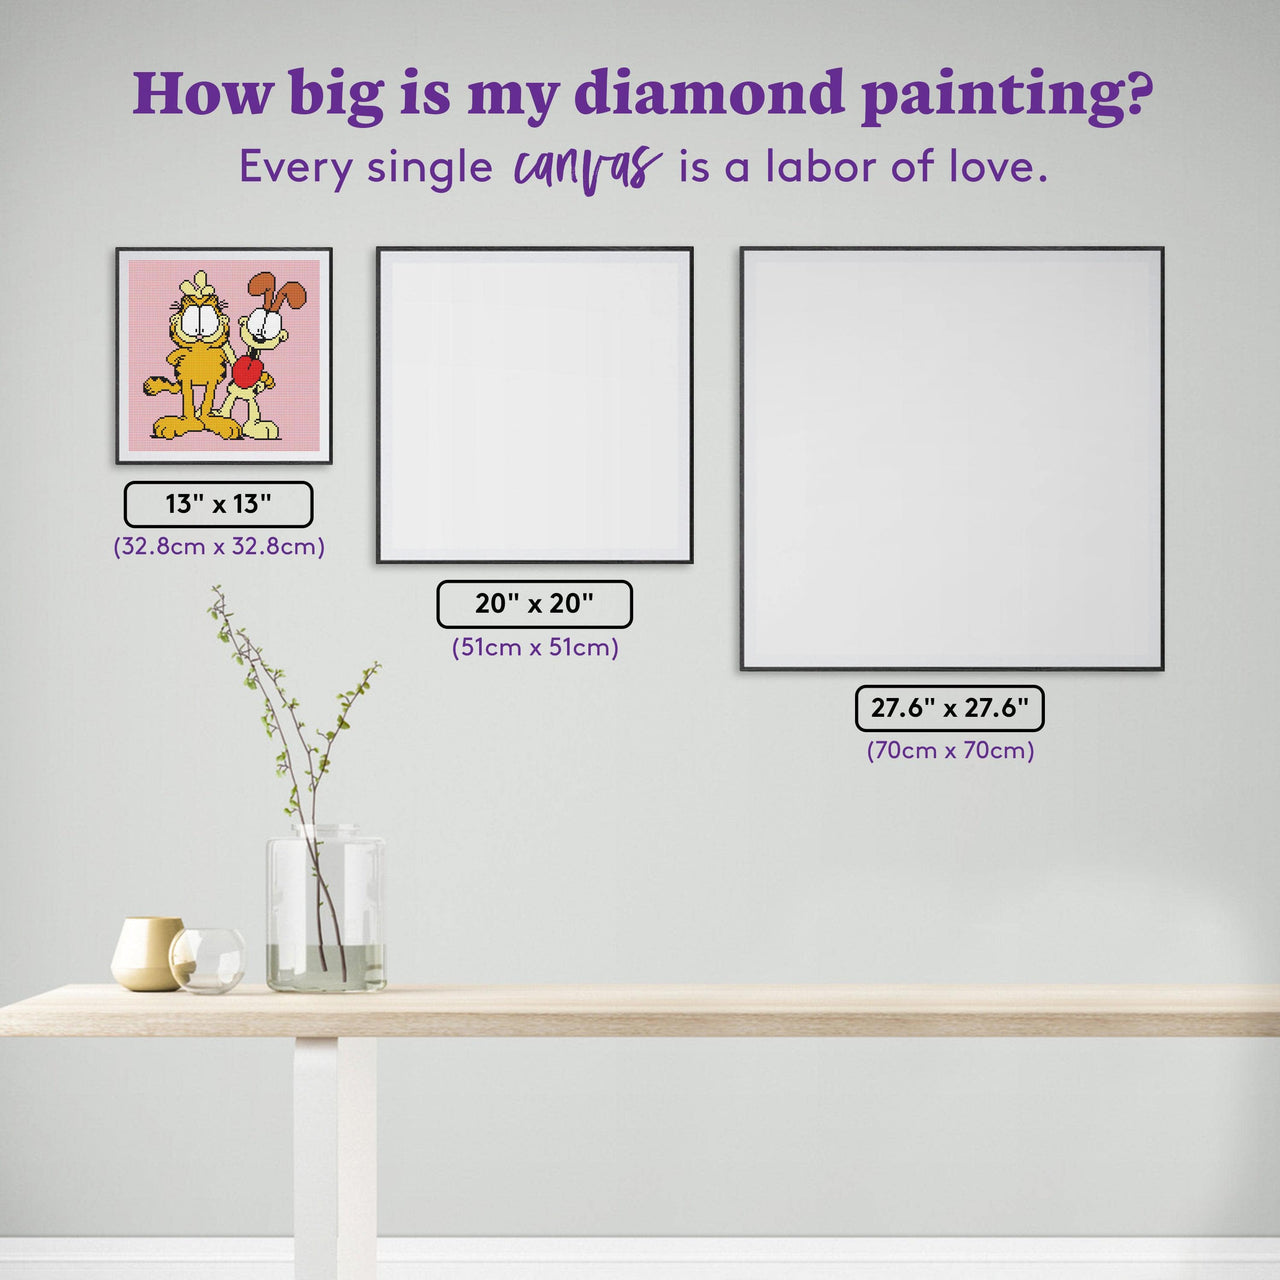 Diamond Painting Say Cheese 13" x 13" (32.8cm x 32.8cm) / Round with 7 Colors including 2 ABs / 13,689